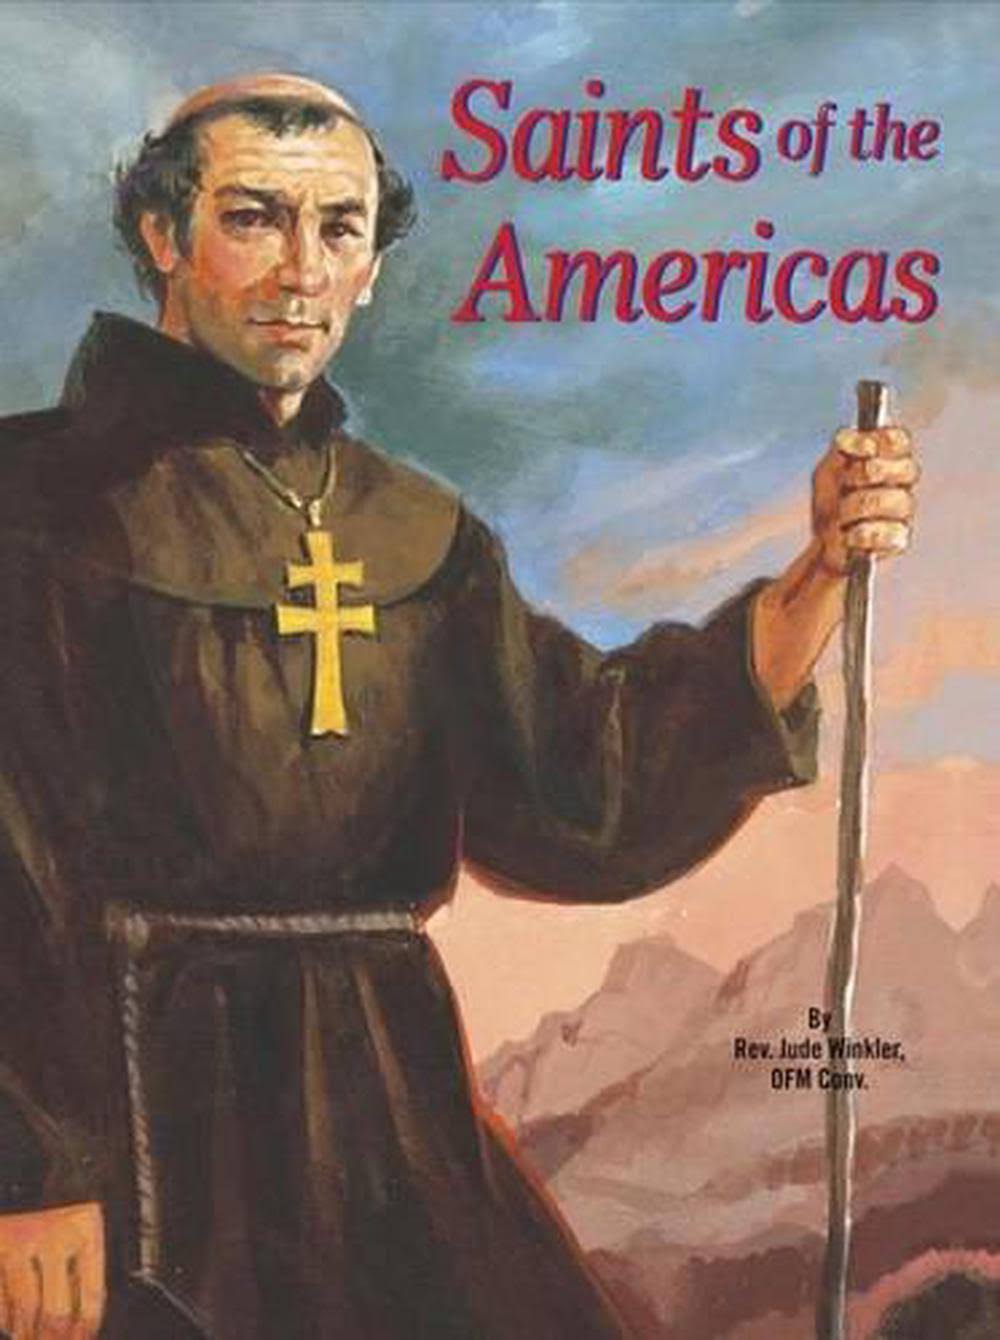 Saints of the Americas [Book]